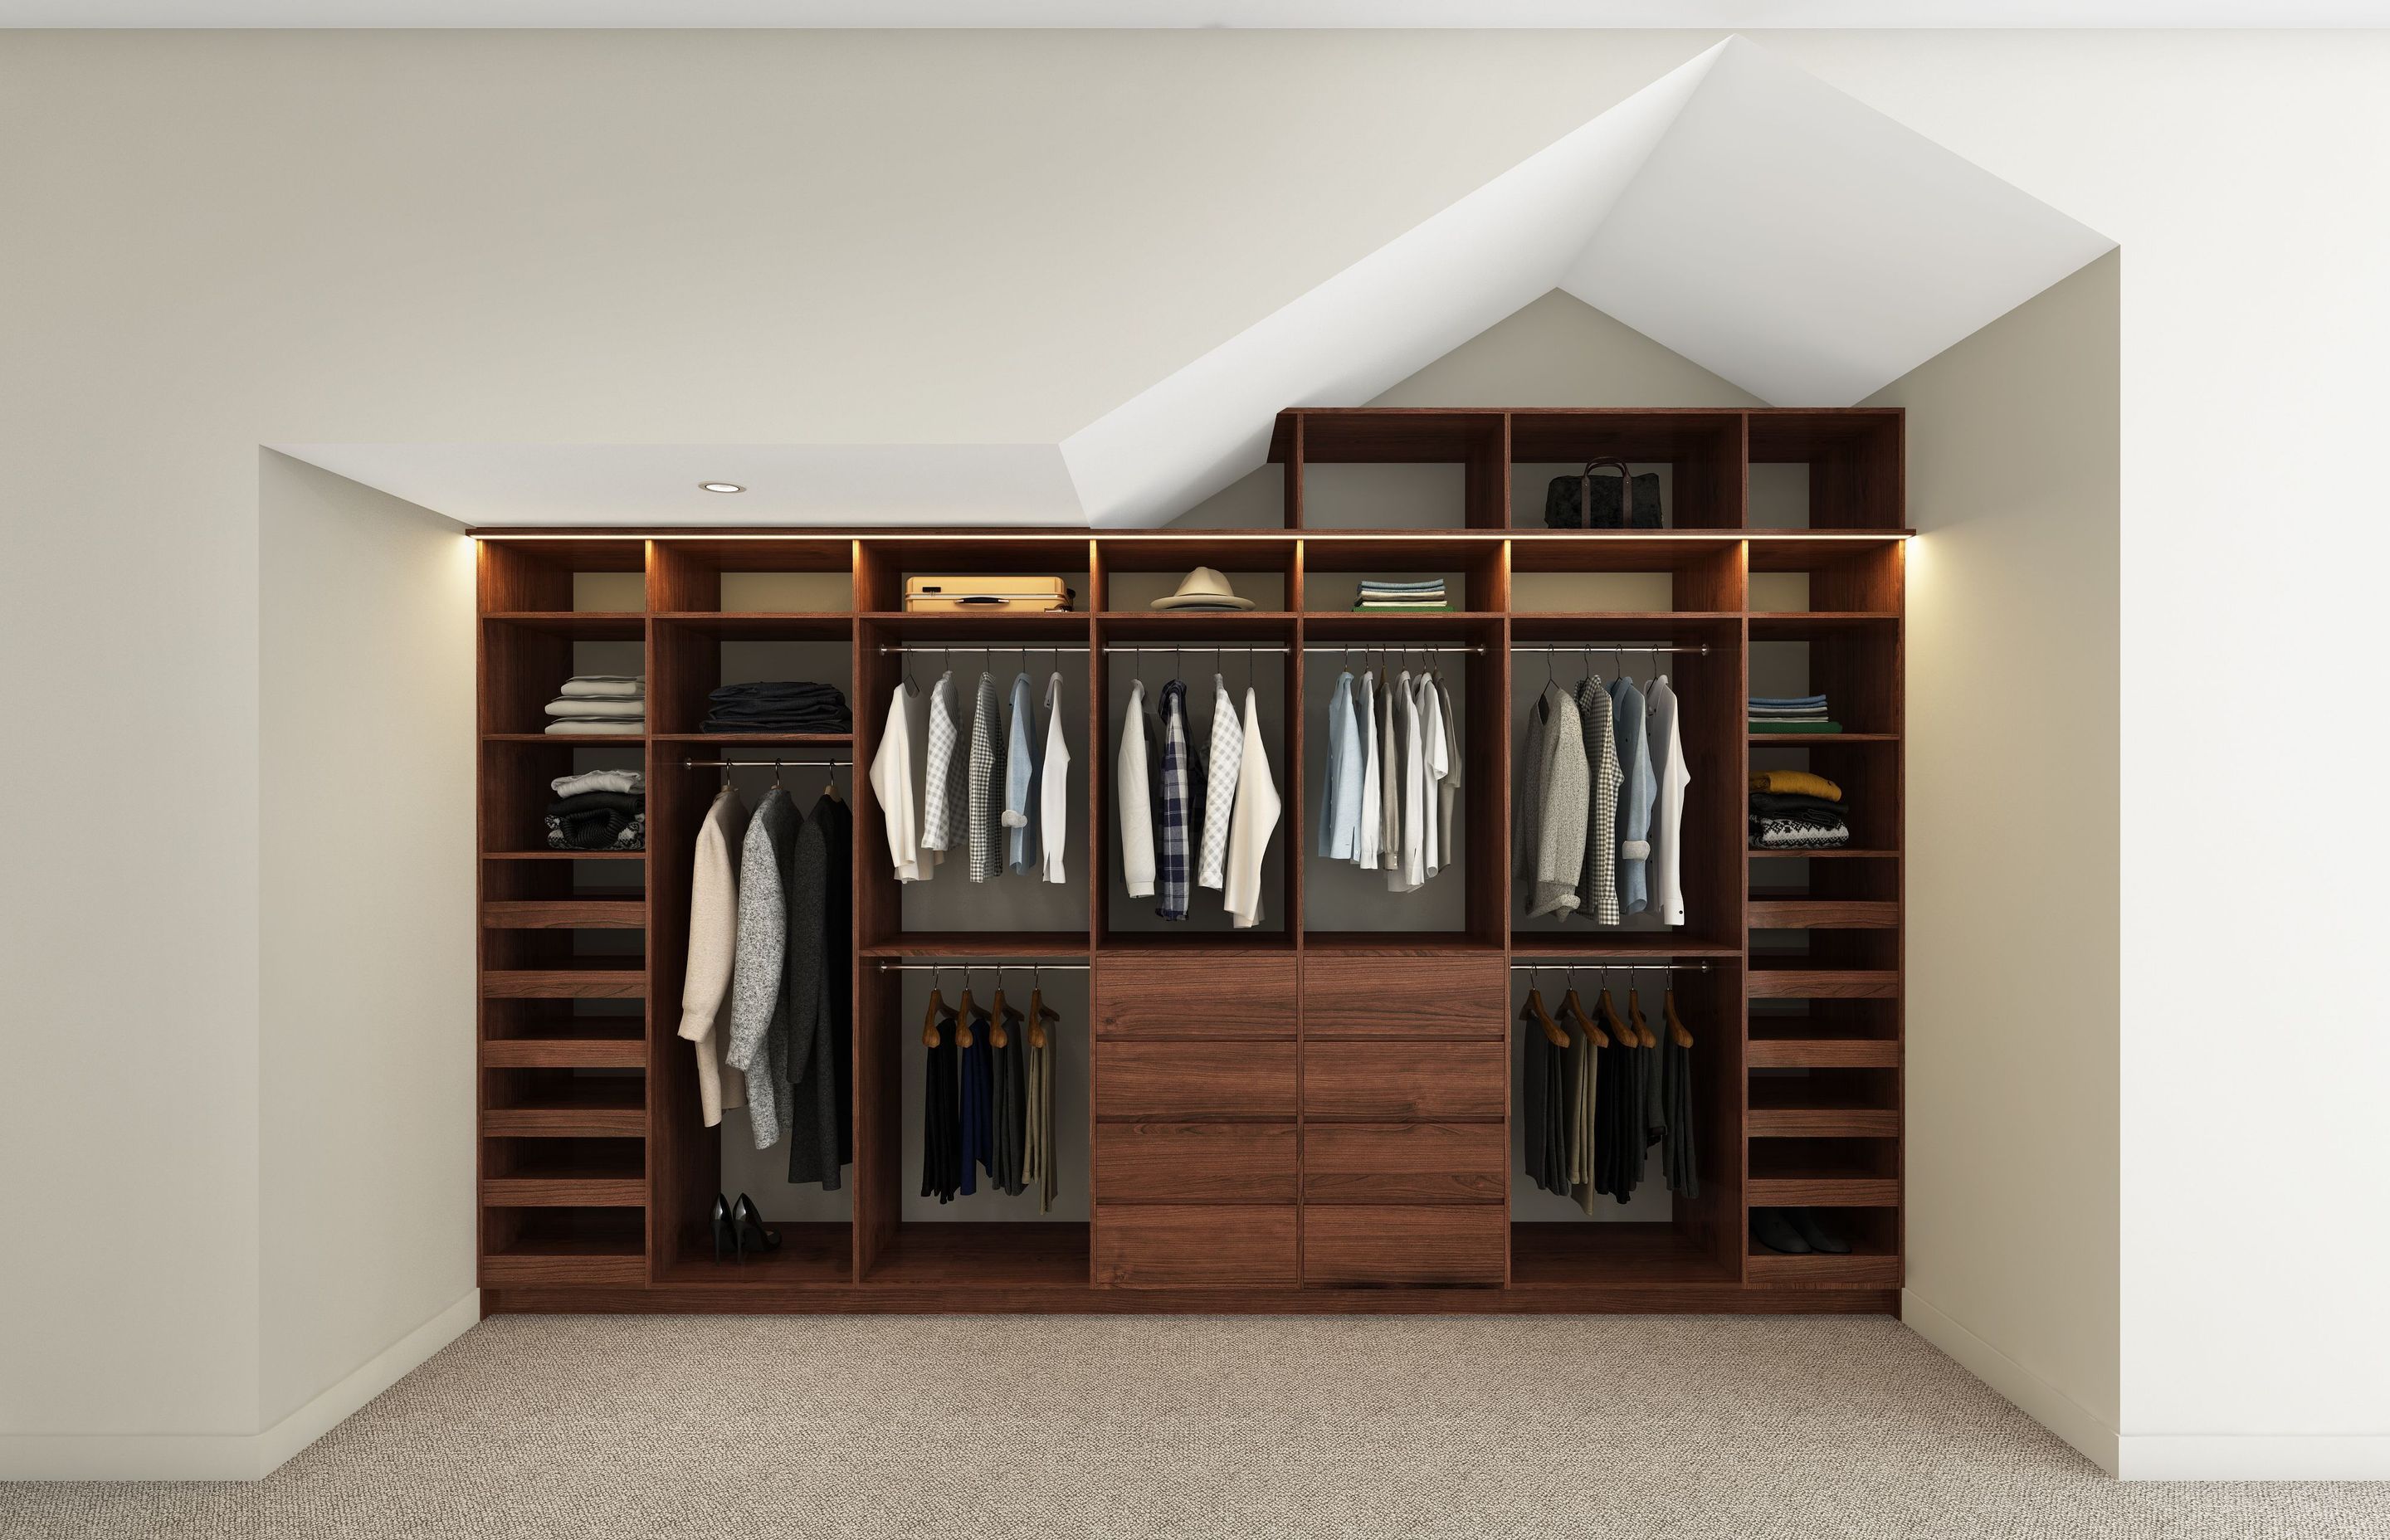 Storage that's stylish, luxurious and a pleasure to use